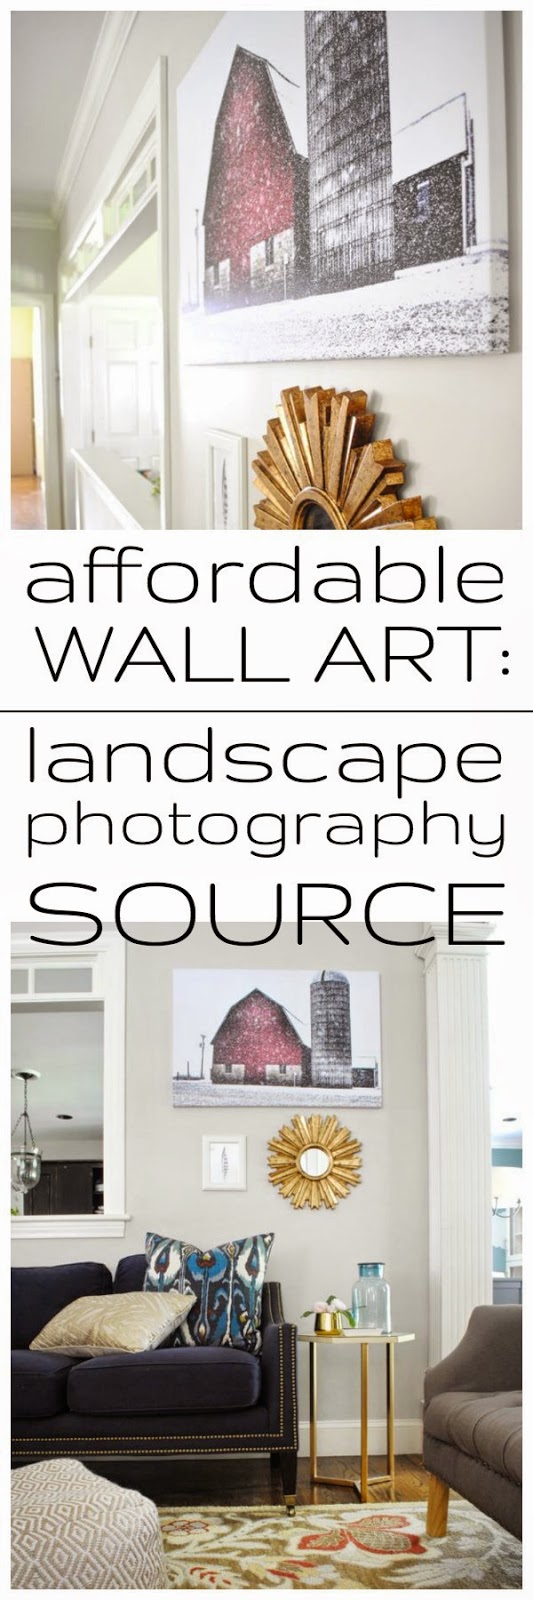 Affordable wall art - gorgeous landscape photography source